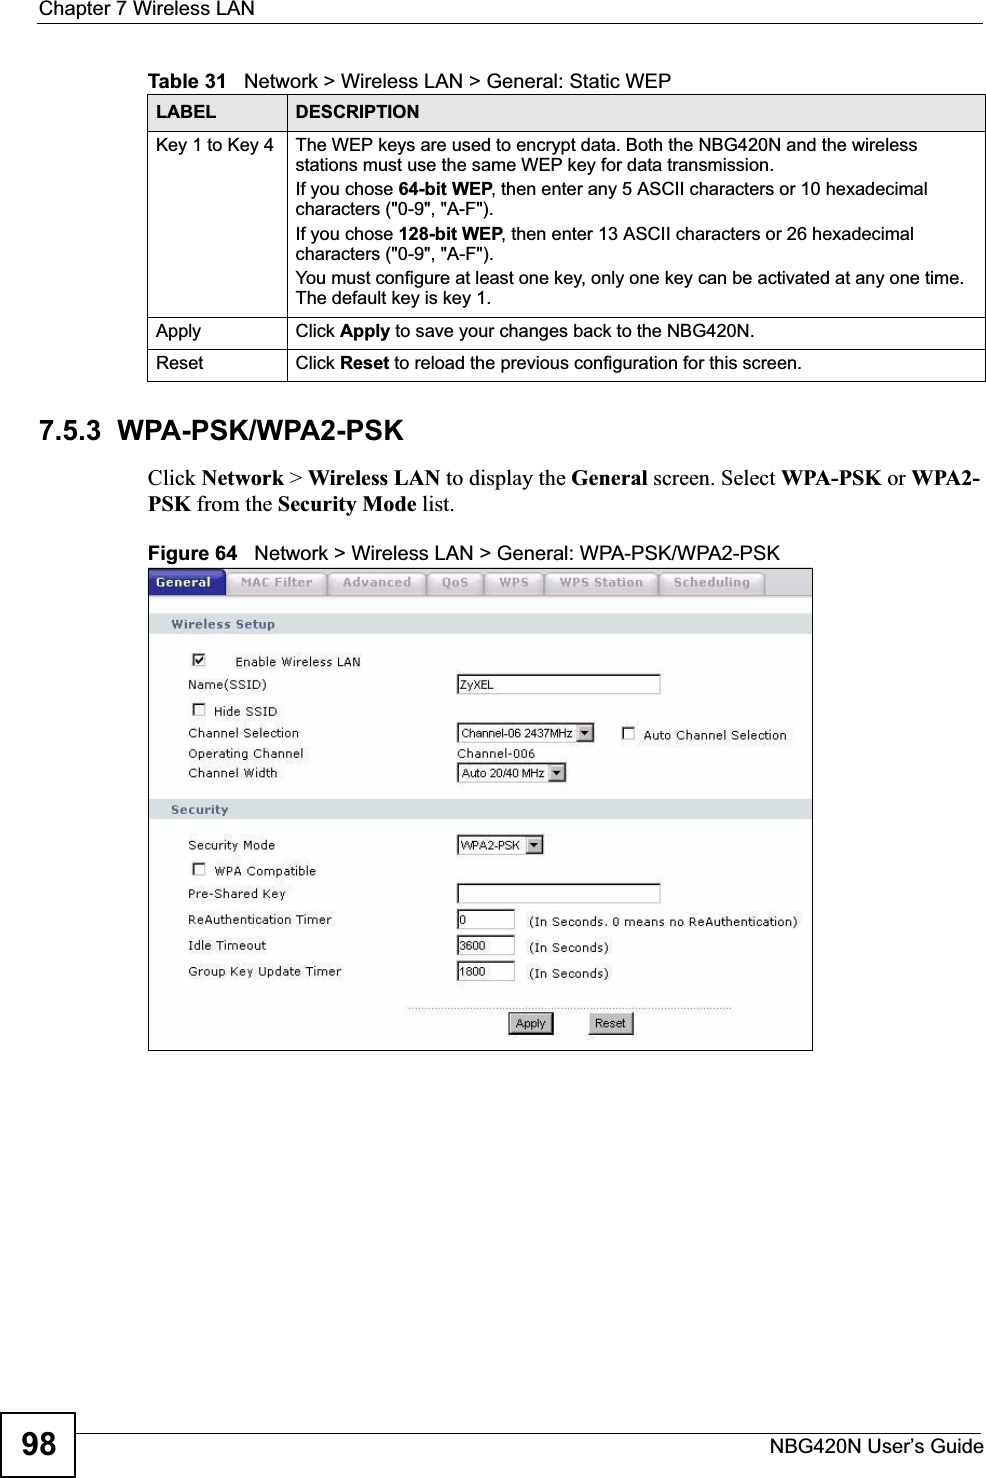 Chapter 7 Wireless LANNBG420N User’s Guide987.5.3  WPA-PSK/WPA2-PSKClick Network &gt; Wireless LAN to display the General screen. Select WPA-PSK or WPA2-PSK from the Security Mode list.Figure 64   Network &gt; Wireless LAN &gt; General: WPA-PSK/WPA2-PSKKey 1 to Key 4 The WEP keys are used to encrypt data. Both the NBG420N and the wireless stations must use the same WEP key for data transmission.If you chose 64-bit WEP, then enter any 5 ASCII characters or 10 hexadecimal characters (&quot;0-9&quot;, &quot;A-F&quot;).If you chose 128-bit WEP, then enter 13 ASCII characters or 26 hexadecimal characters (&quot;0-9&quot;, &quot;A-F&quot;). You must configure at least one key, only one key can be activated at any one time. The default key is key 1.Apply Click Apply to save your changes back to the NBG420N.Reset Click Reset to reload the previous configuration for this screen.Table 31   Network &gt; Wireless LAN &gt; General: Static WEPLABEL DESCRIPTION